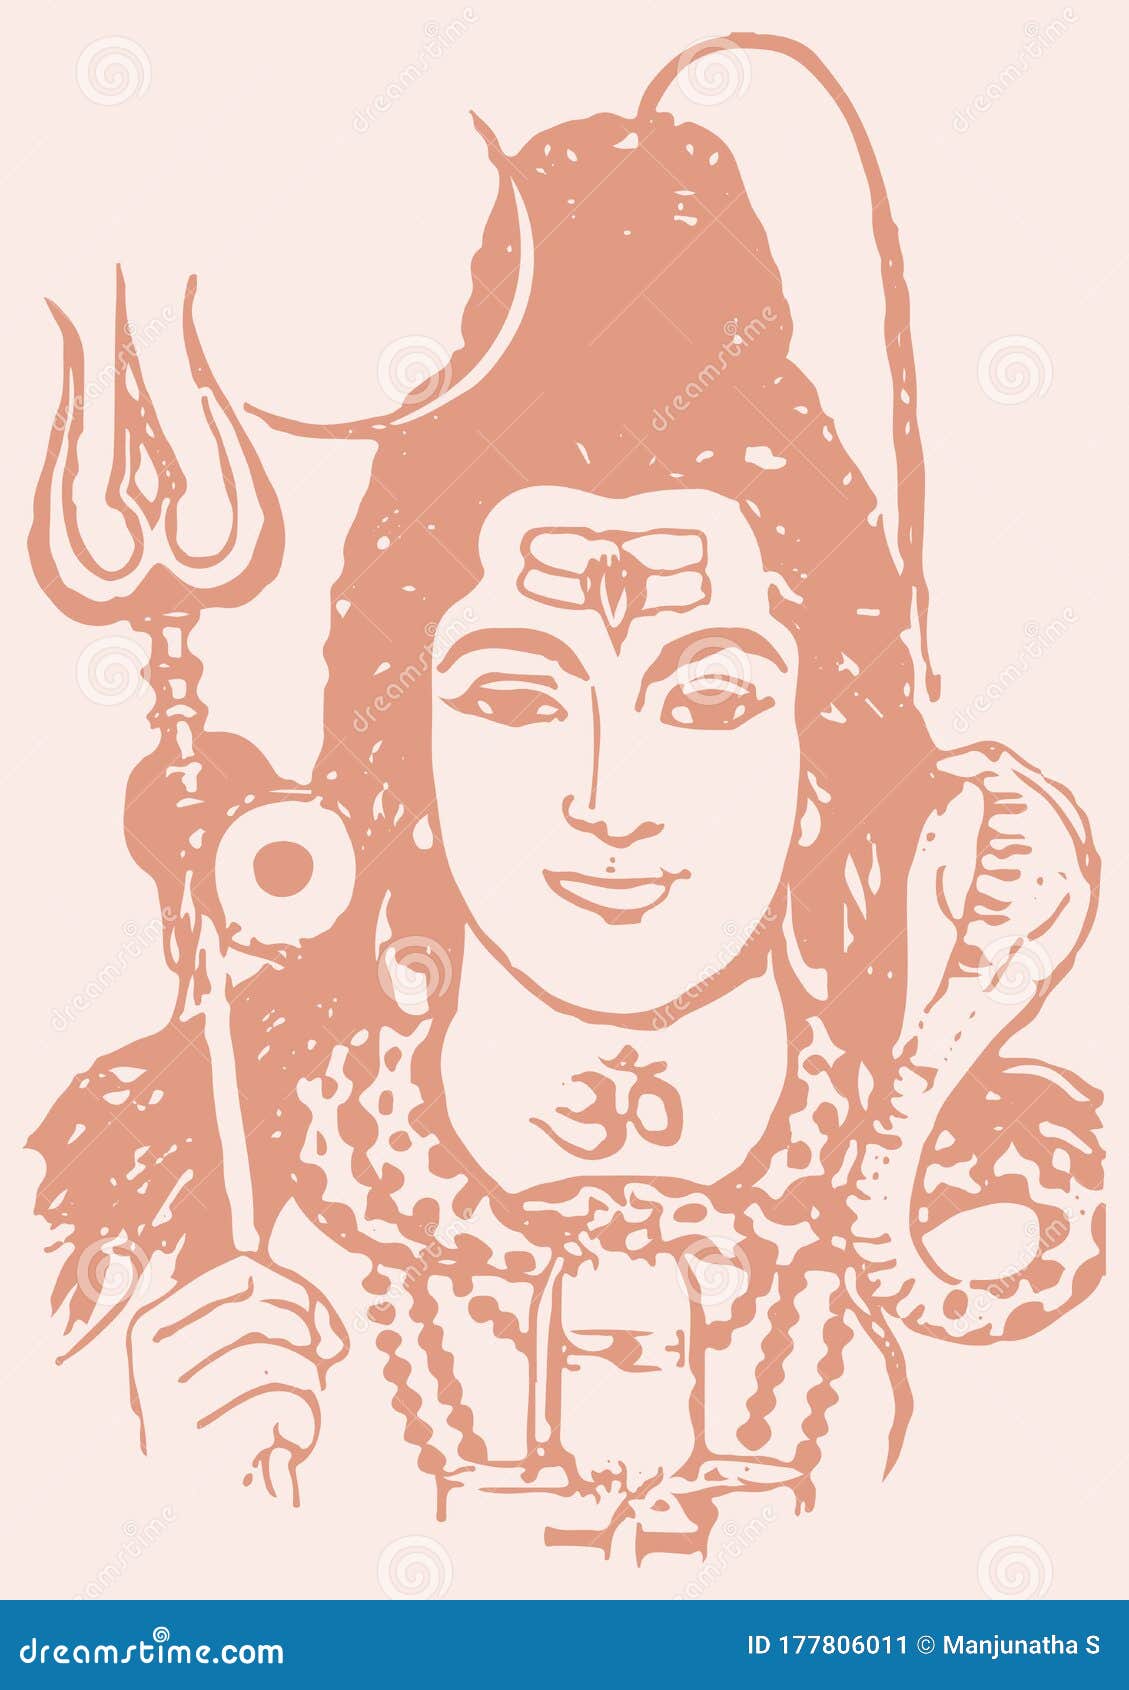 Drawing of Blessing Lord Shiva Outline Illustration Stock Vector ...